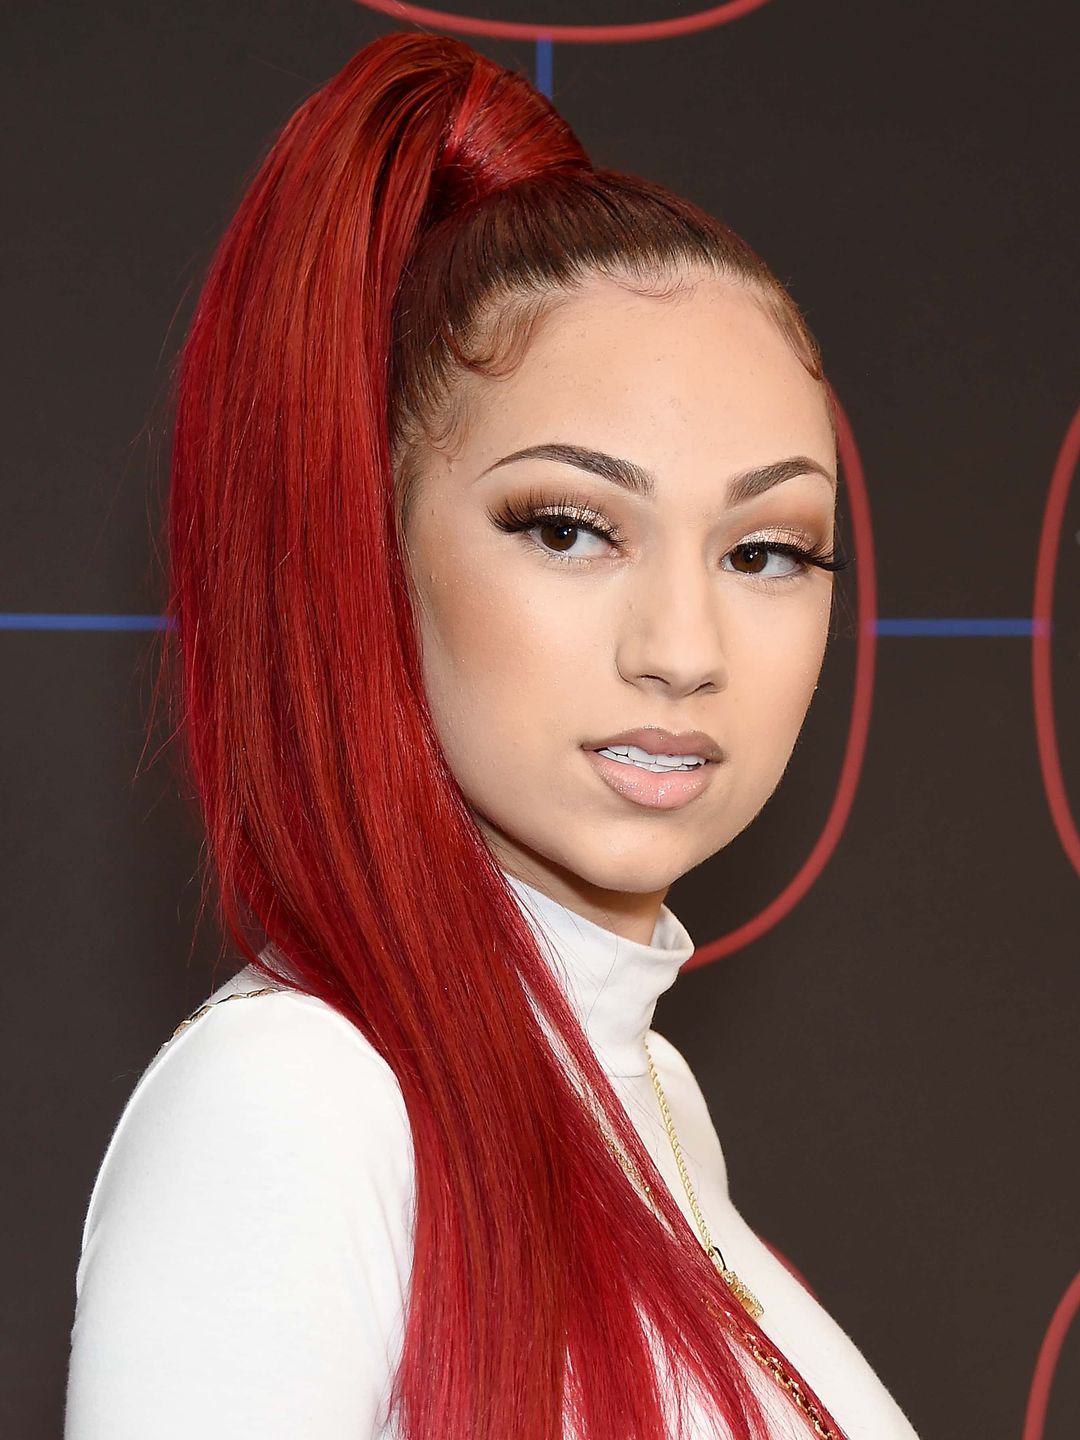 Danielle Bregoli who is her father